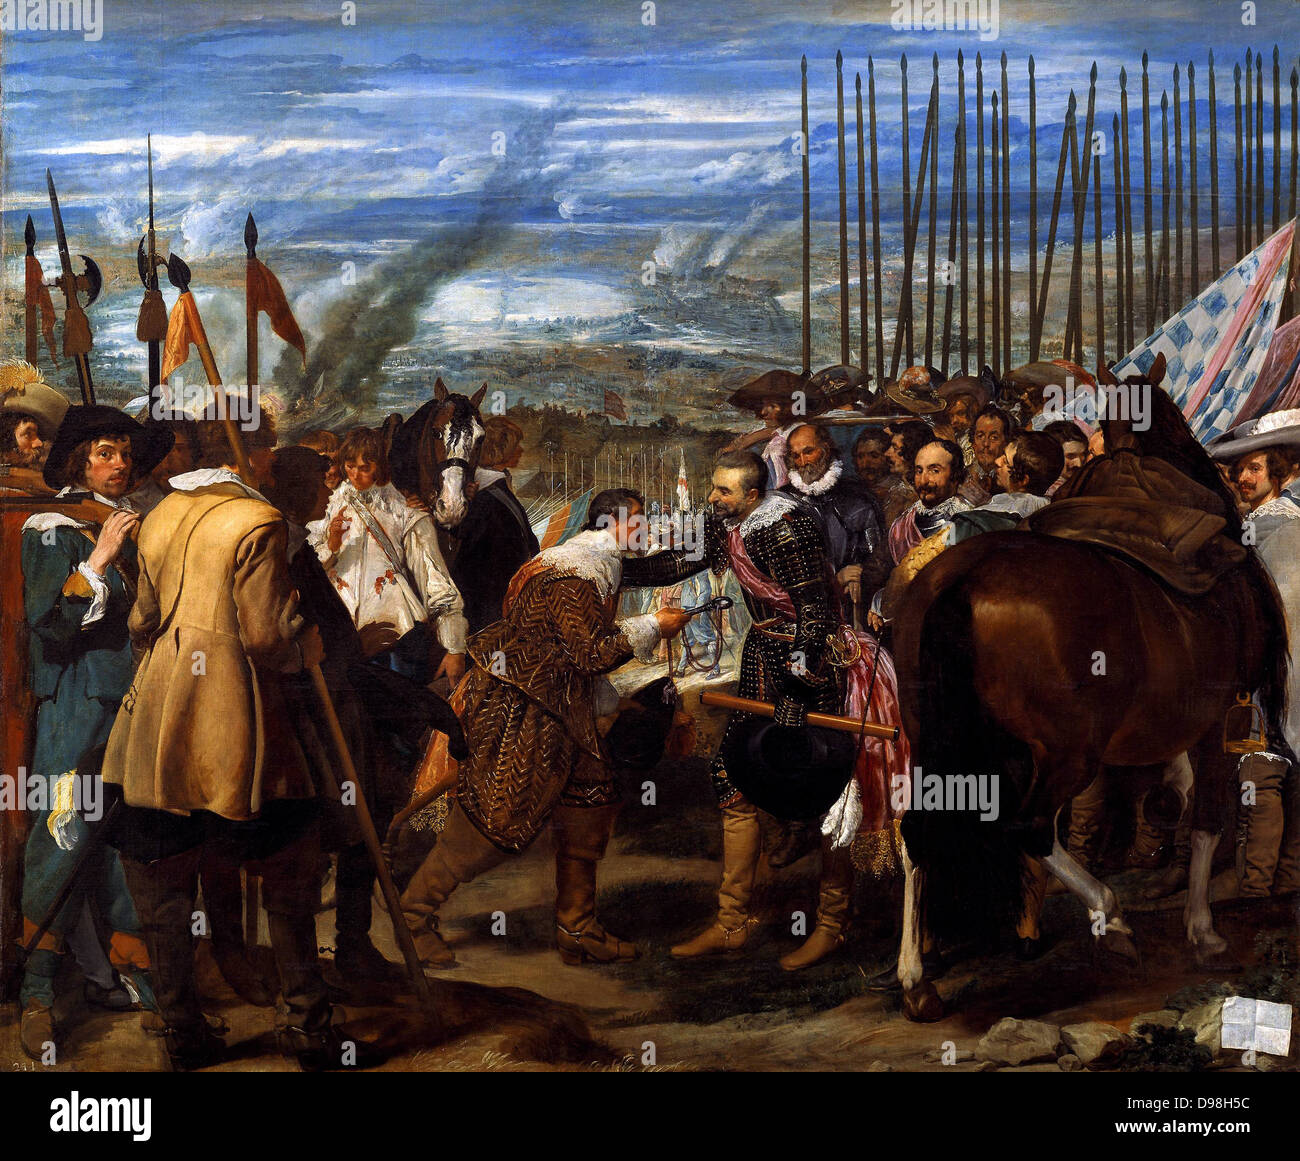 Diego Velázquez (1599–1660)  Spanish painter. The Surrender of Breda, or The Lances.  Oil on canvas, 1635.The Siege of Breda is the name for two major sieges of the Eighty Years' War and Thirty Years' War. The Dutch fortress city of Breda fell to a Spanish army under Ambrosio Spinola in 1625; it was retaken by Frederick Henry of Orange in the 1637 Siege of Breda Stock Photo